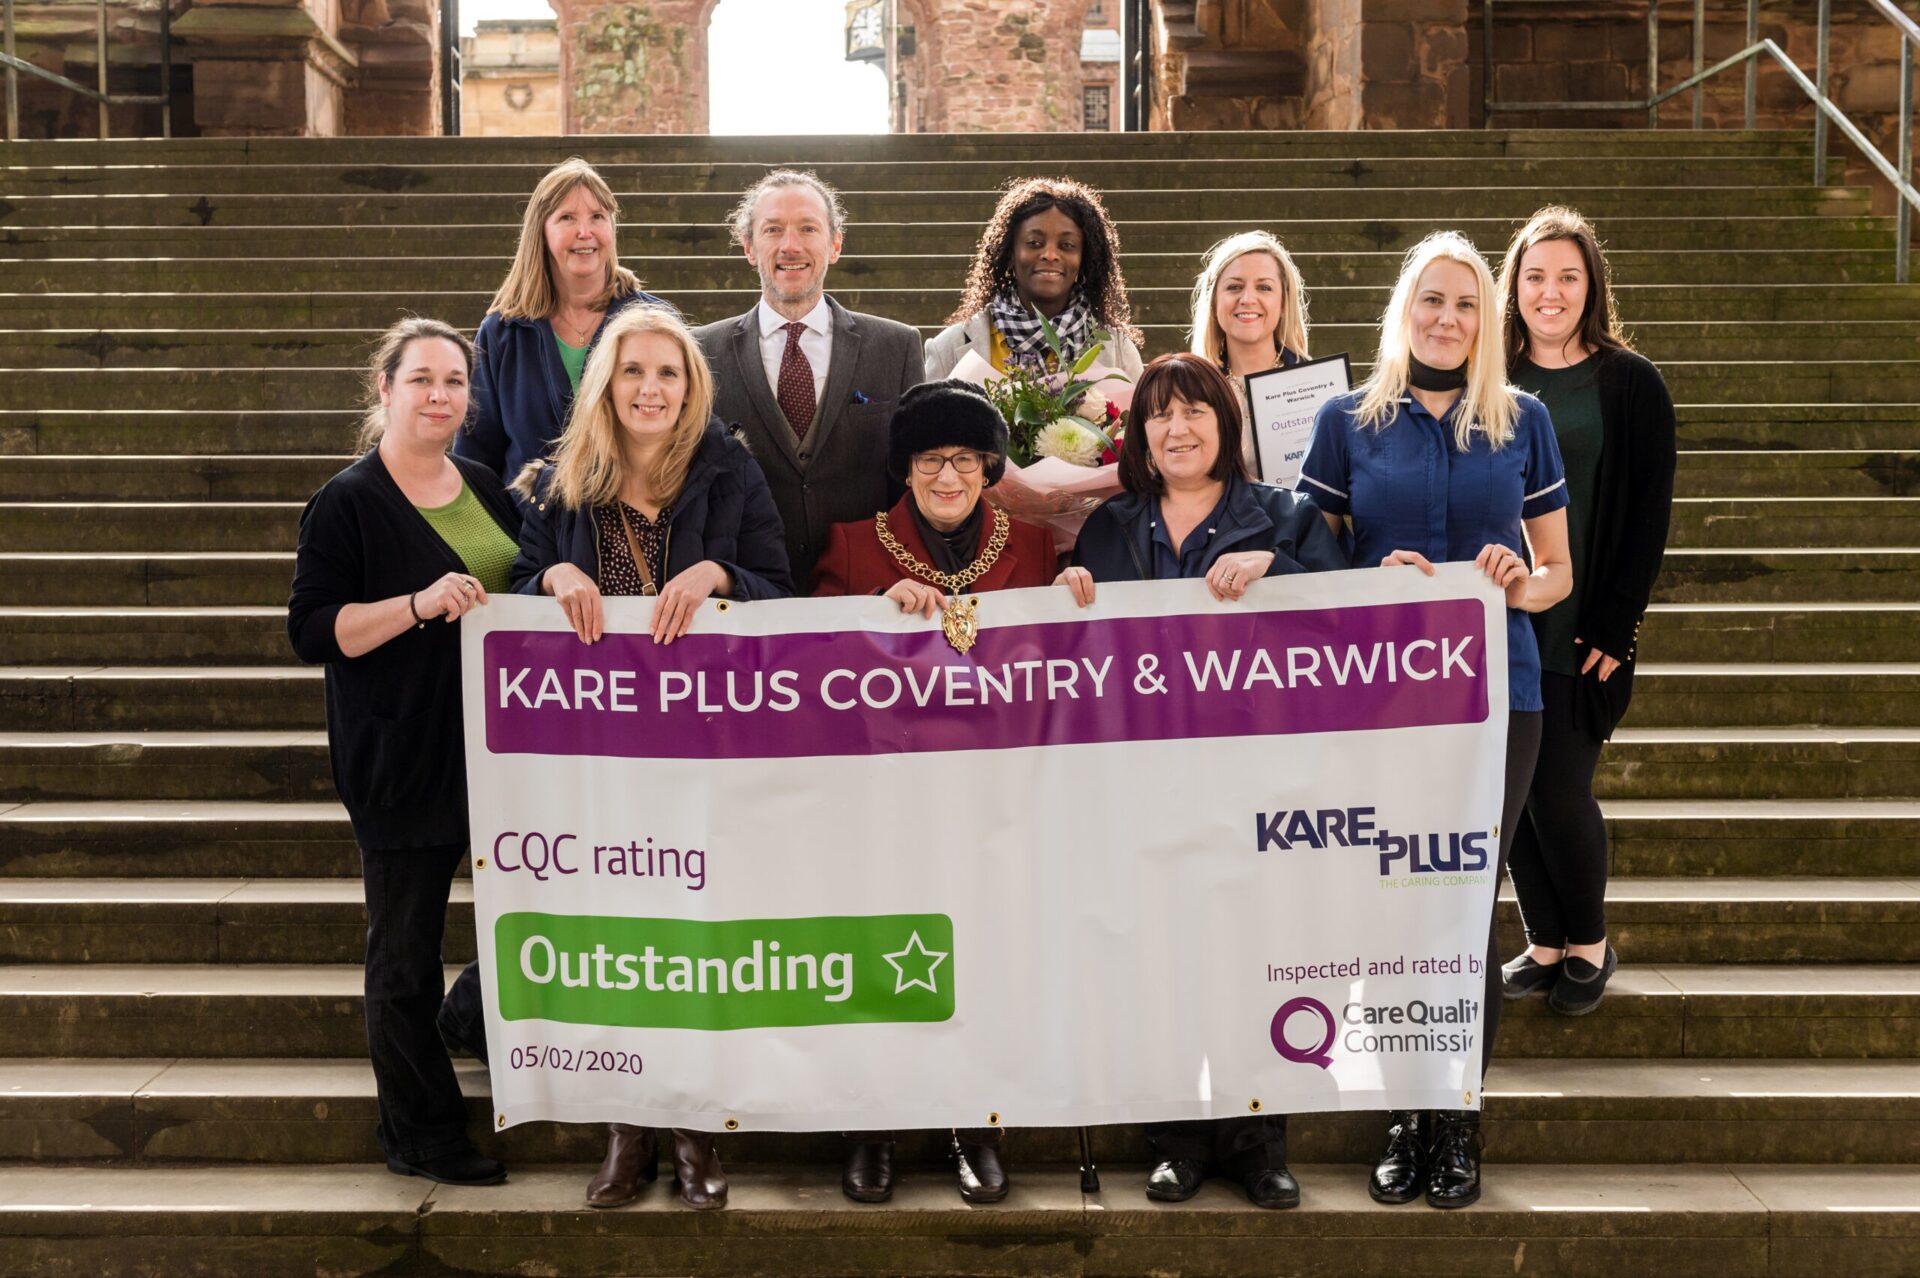 Kare Plus Coventry & Warwick Awarded Outstanding CQC Rating